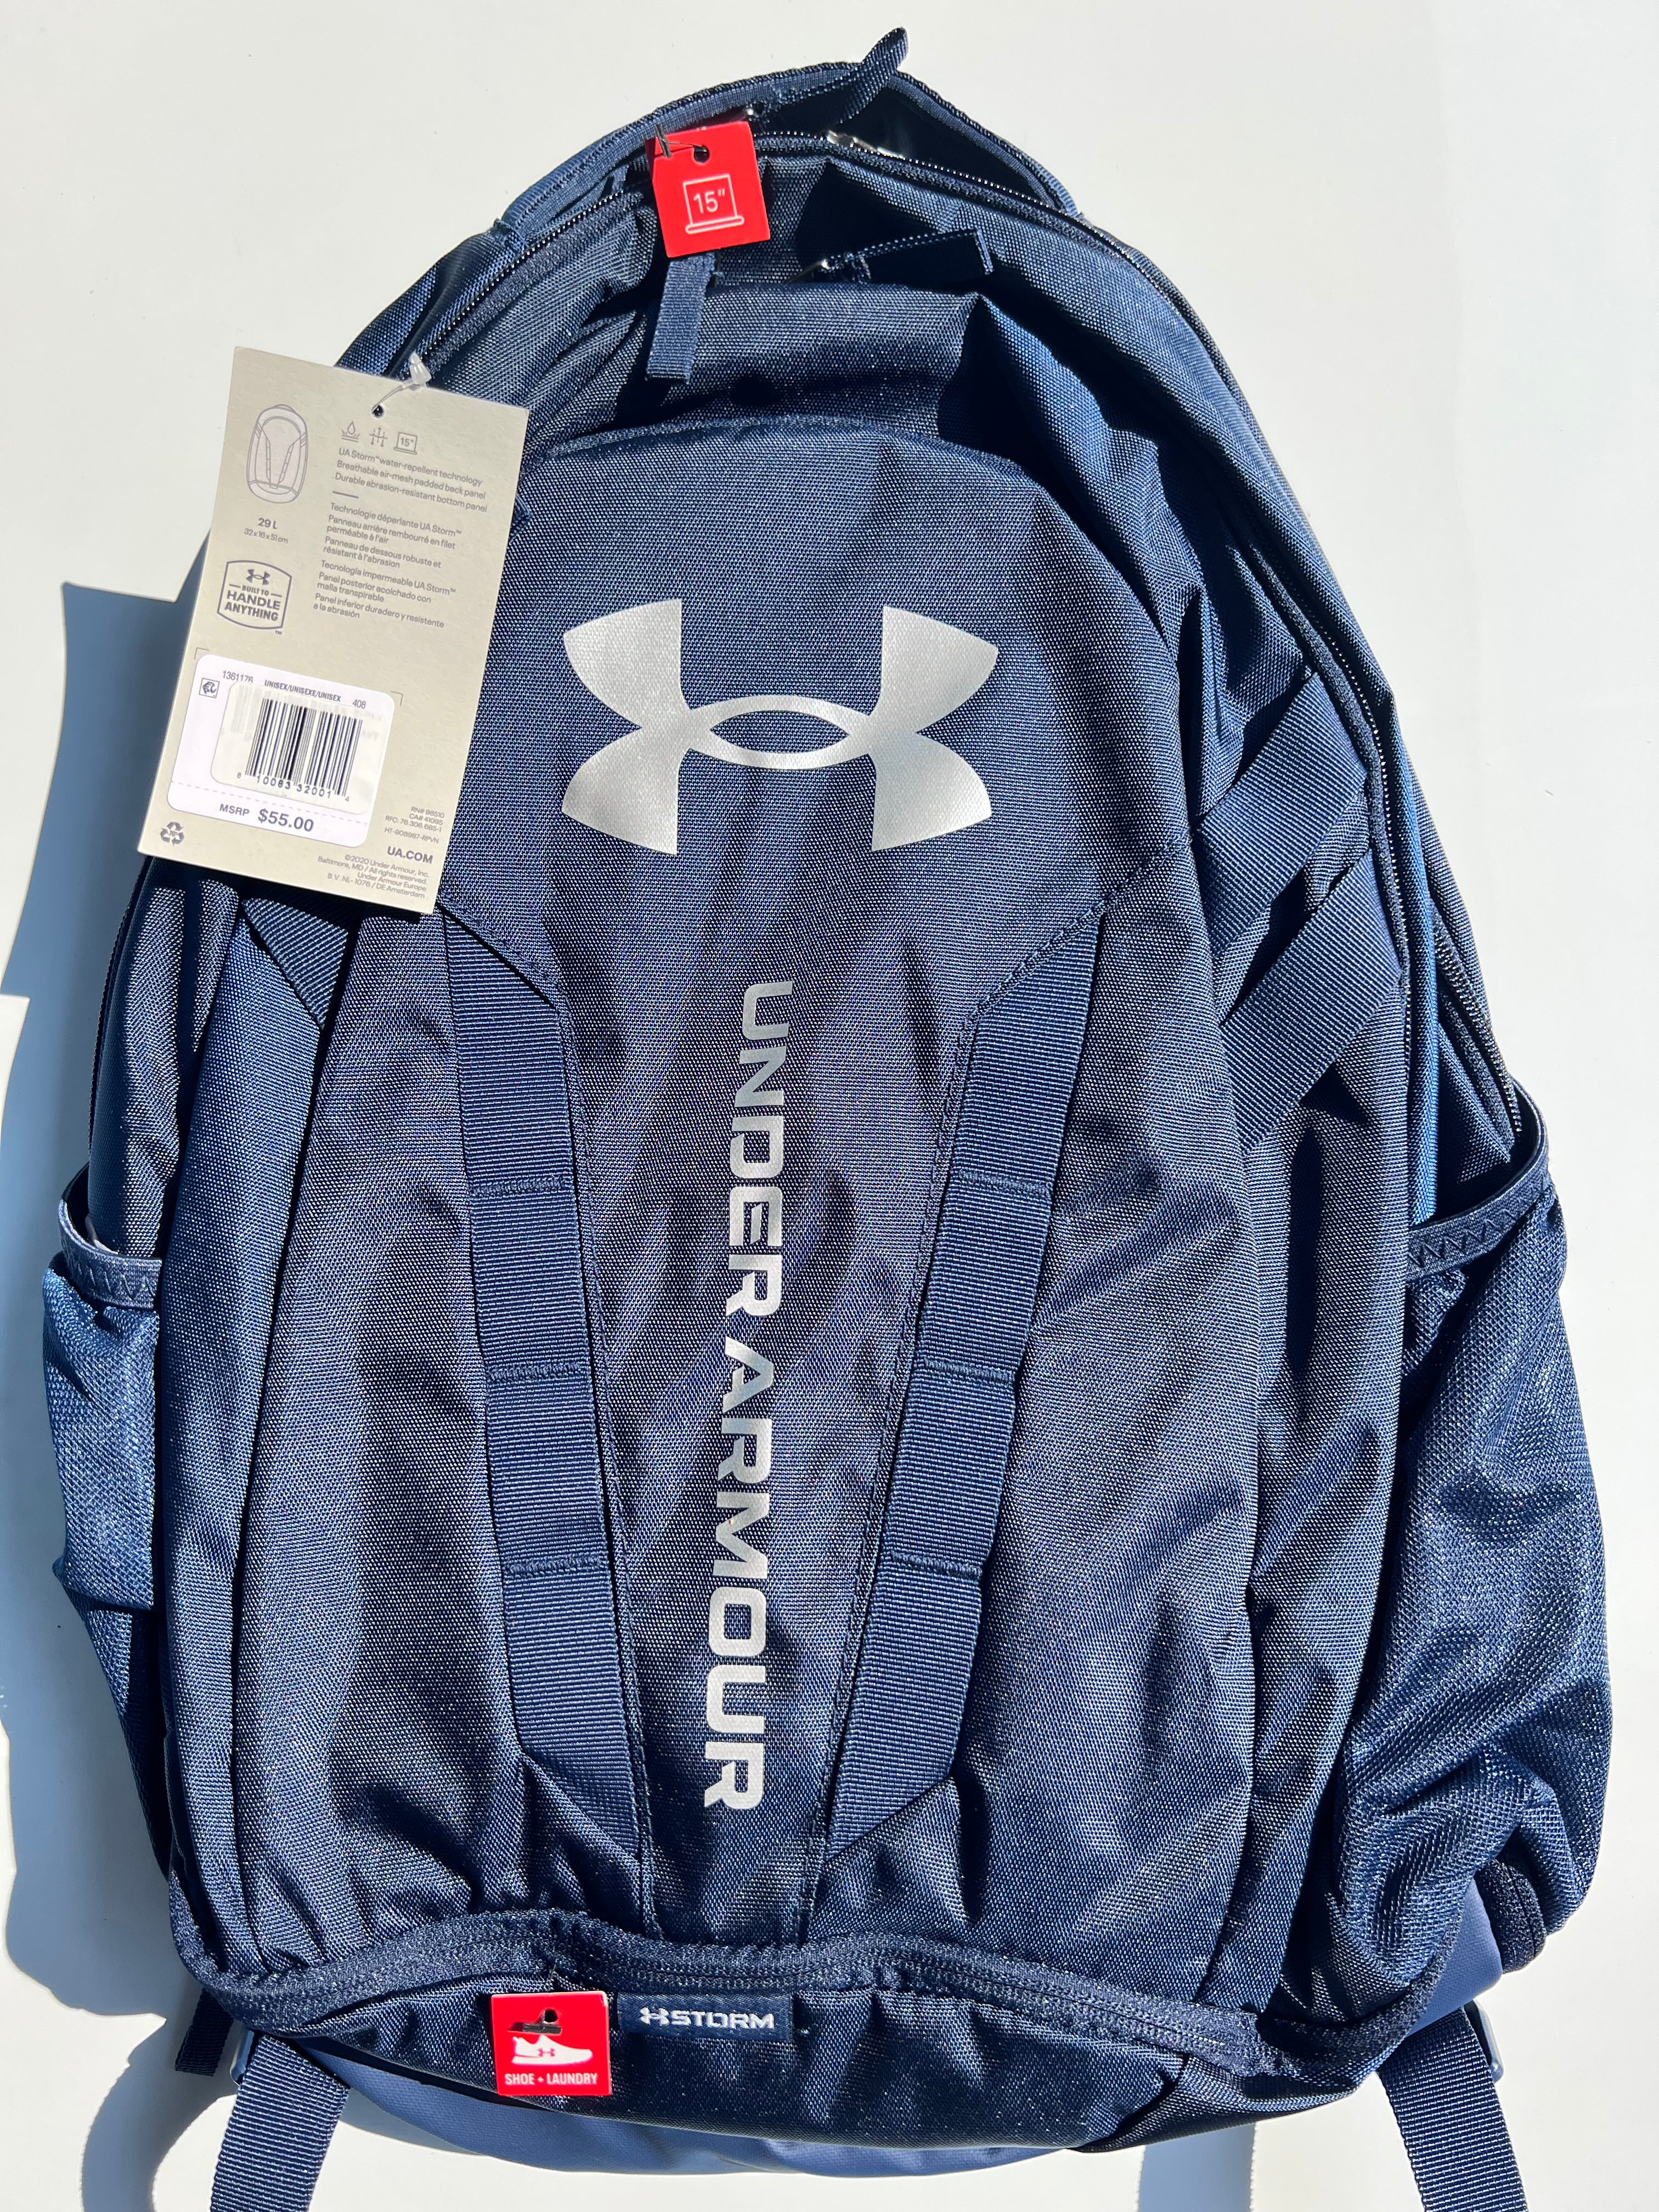 Under Armour Adult Hustle 5.0 Backpack , Blue, One Size Fits All - Donated Goods & Services